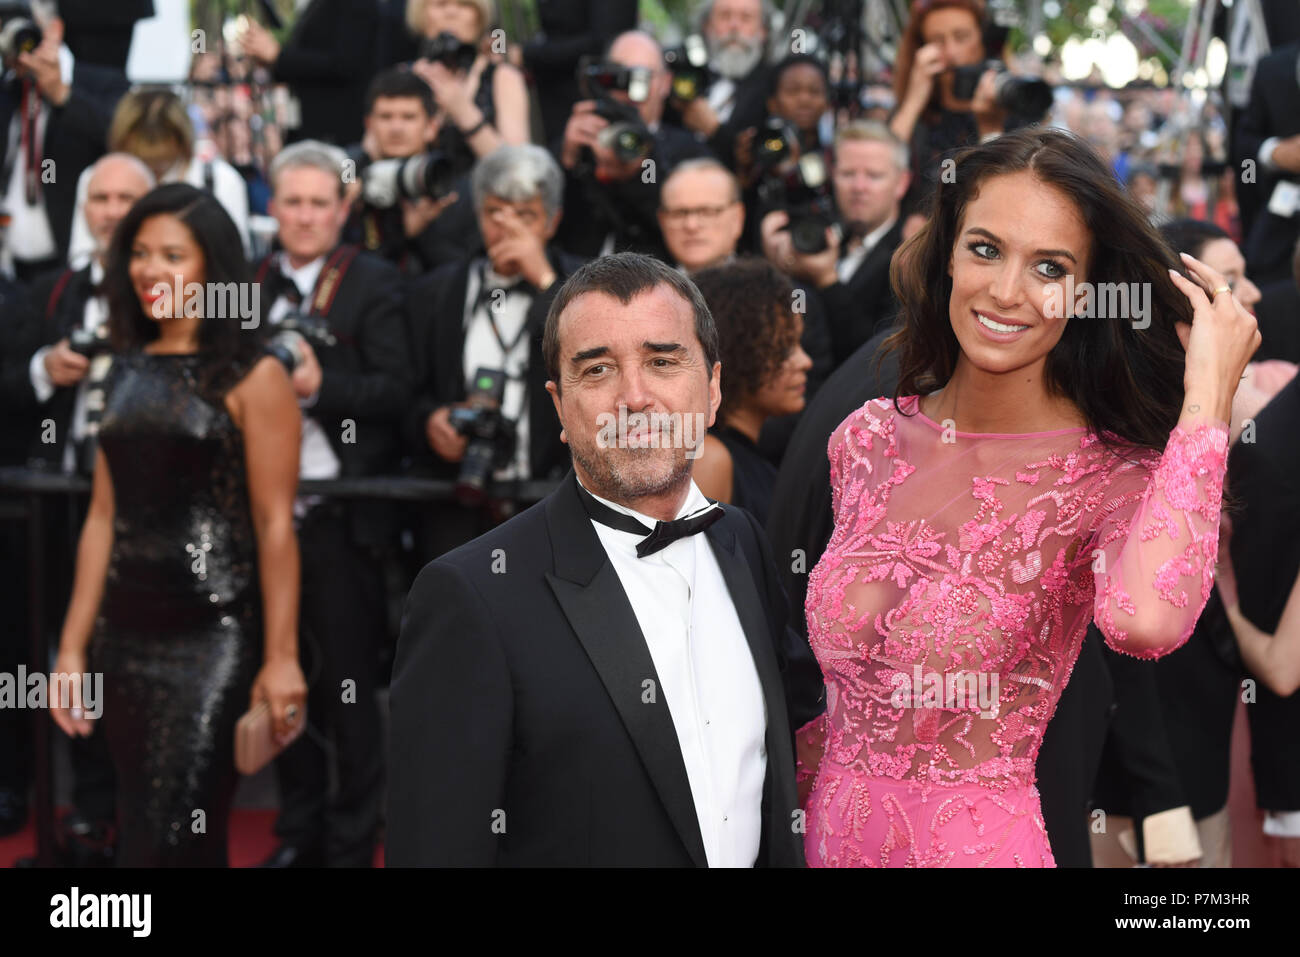 May 24 2017 Cannes France Arnaud Lagardere And Jade Foret Attend The The Beguiled Premiere During